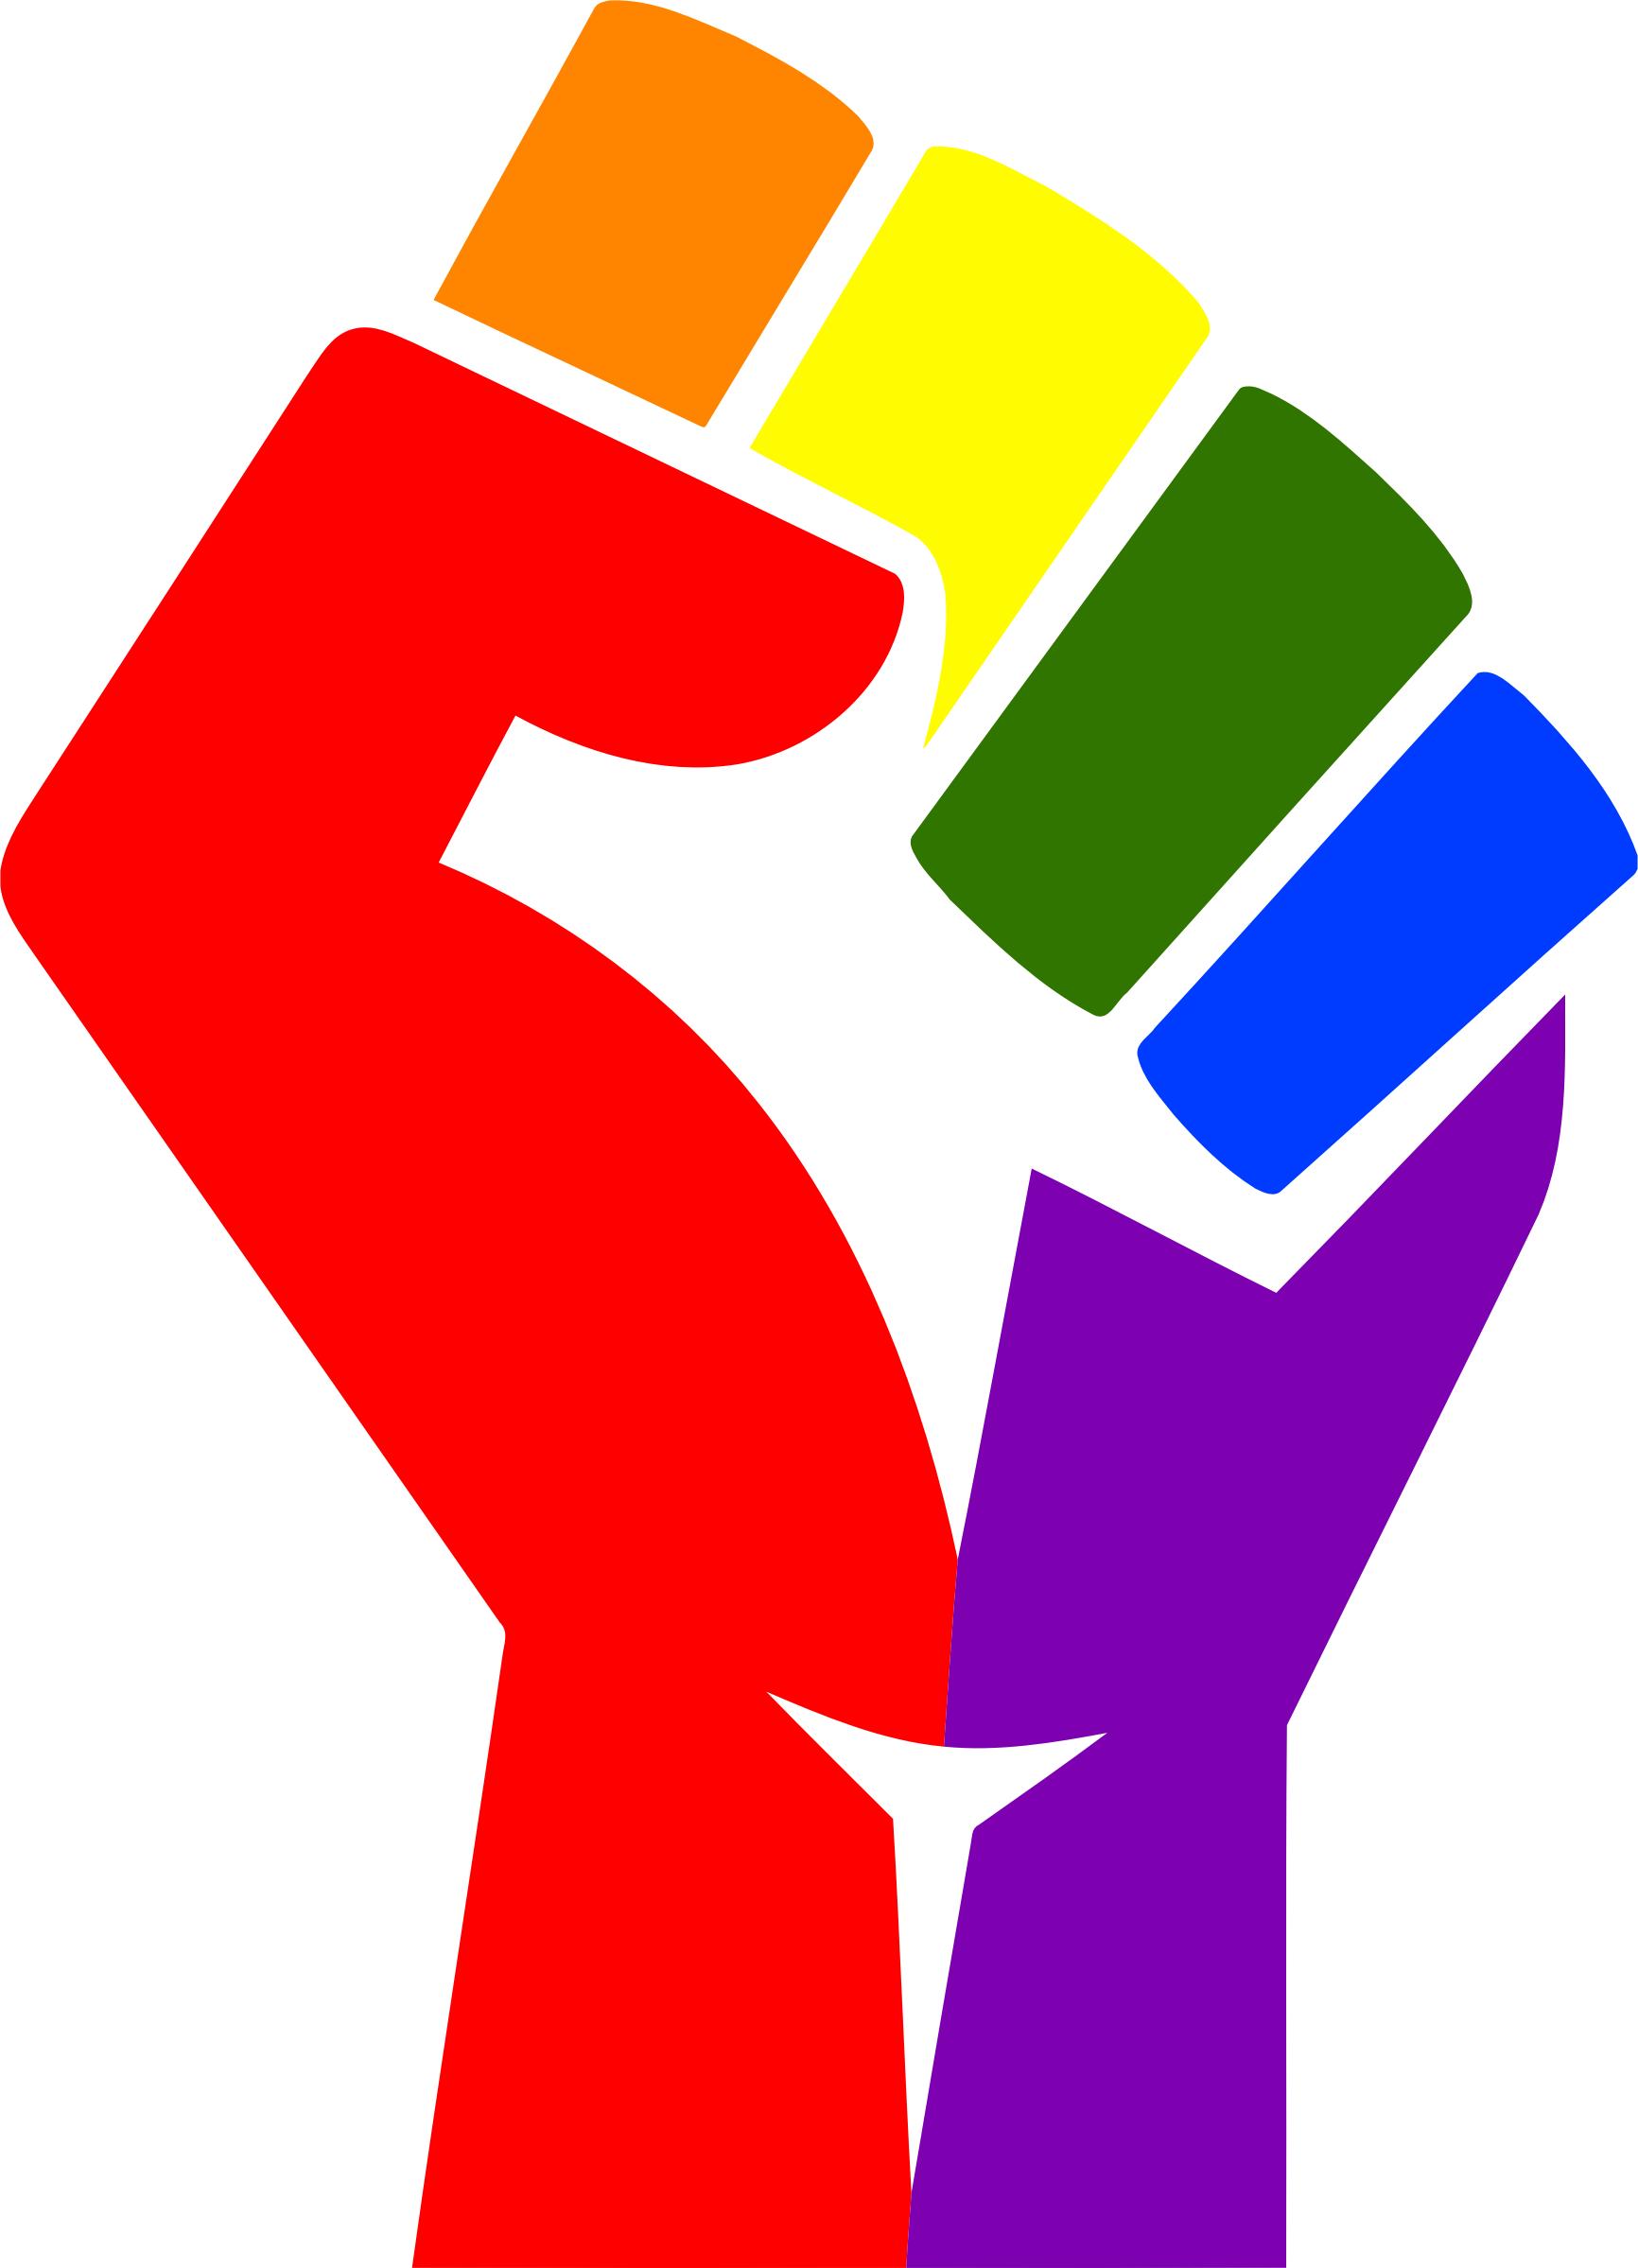 Rainbow fist remixed Icons PNG - Free PNG and Icons Downloads